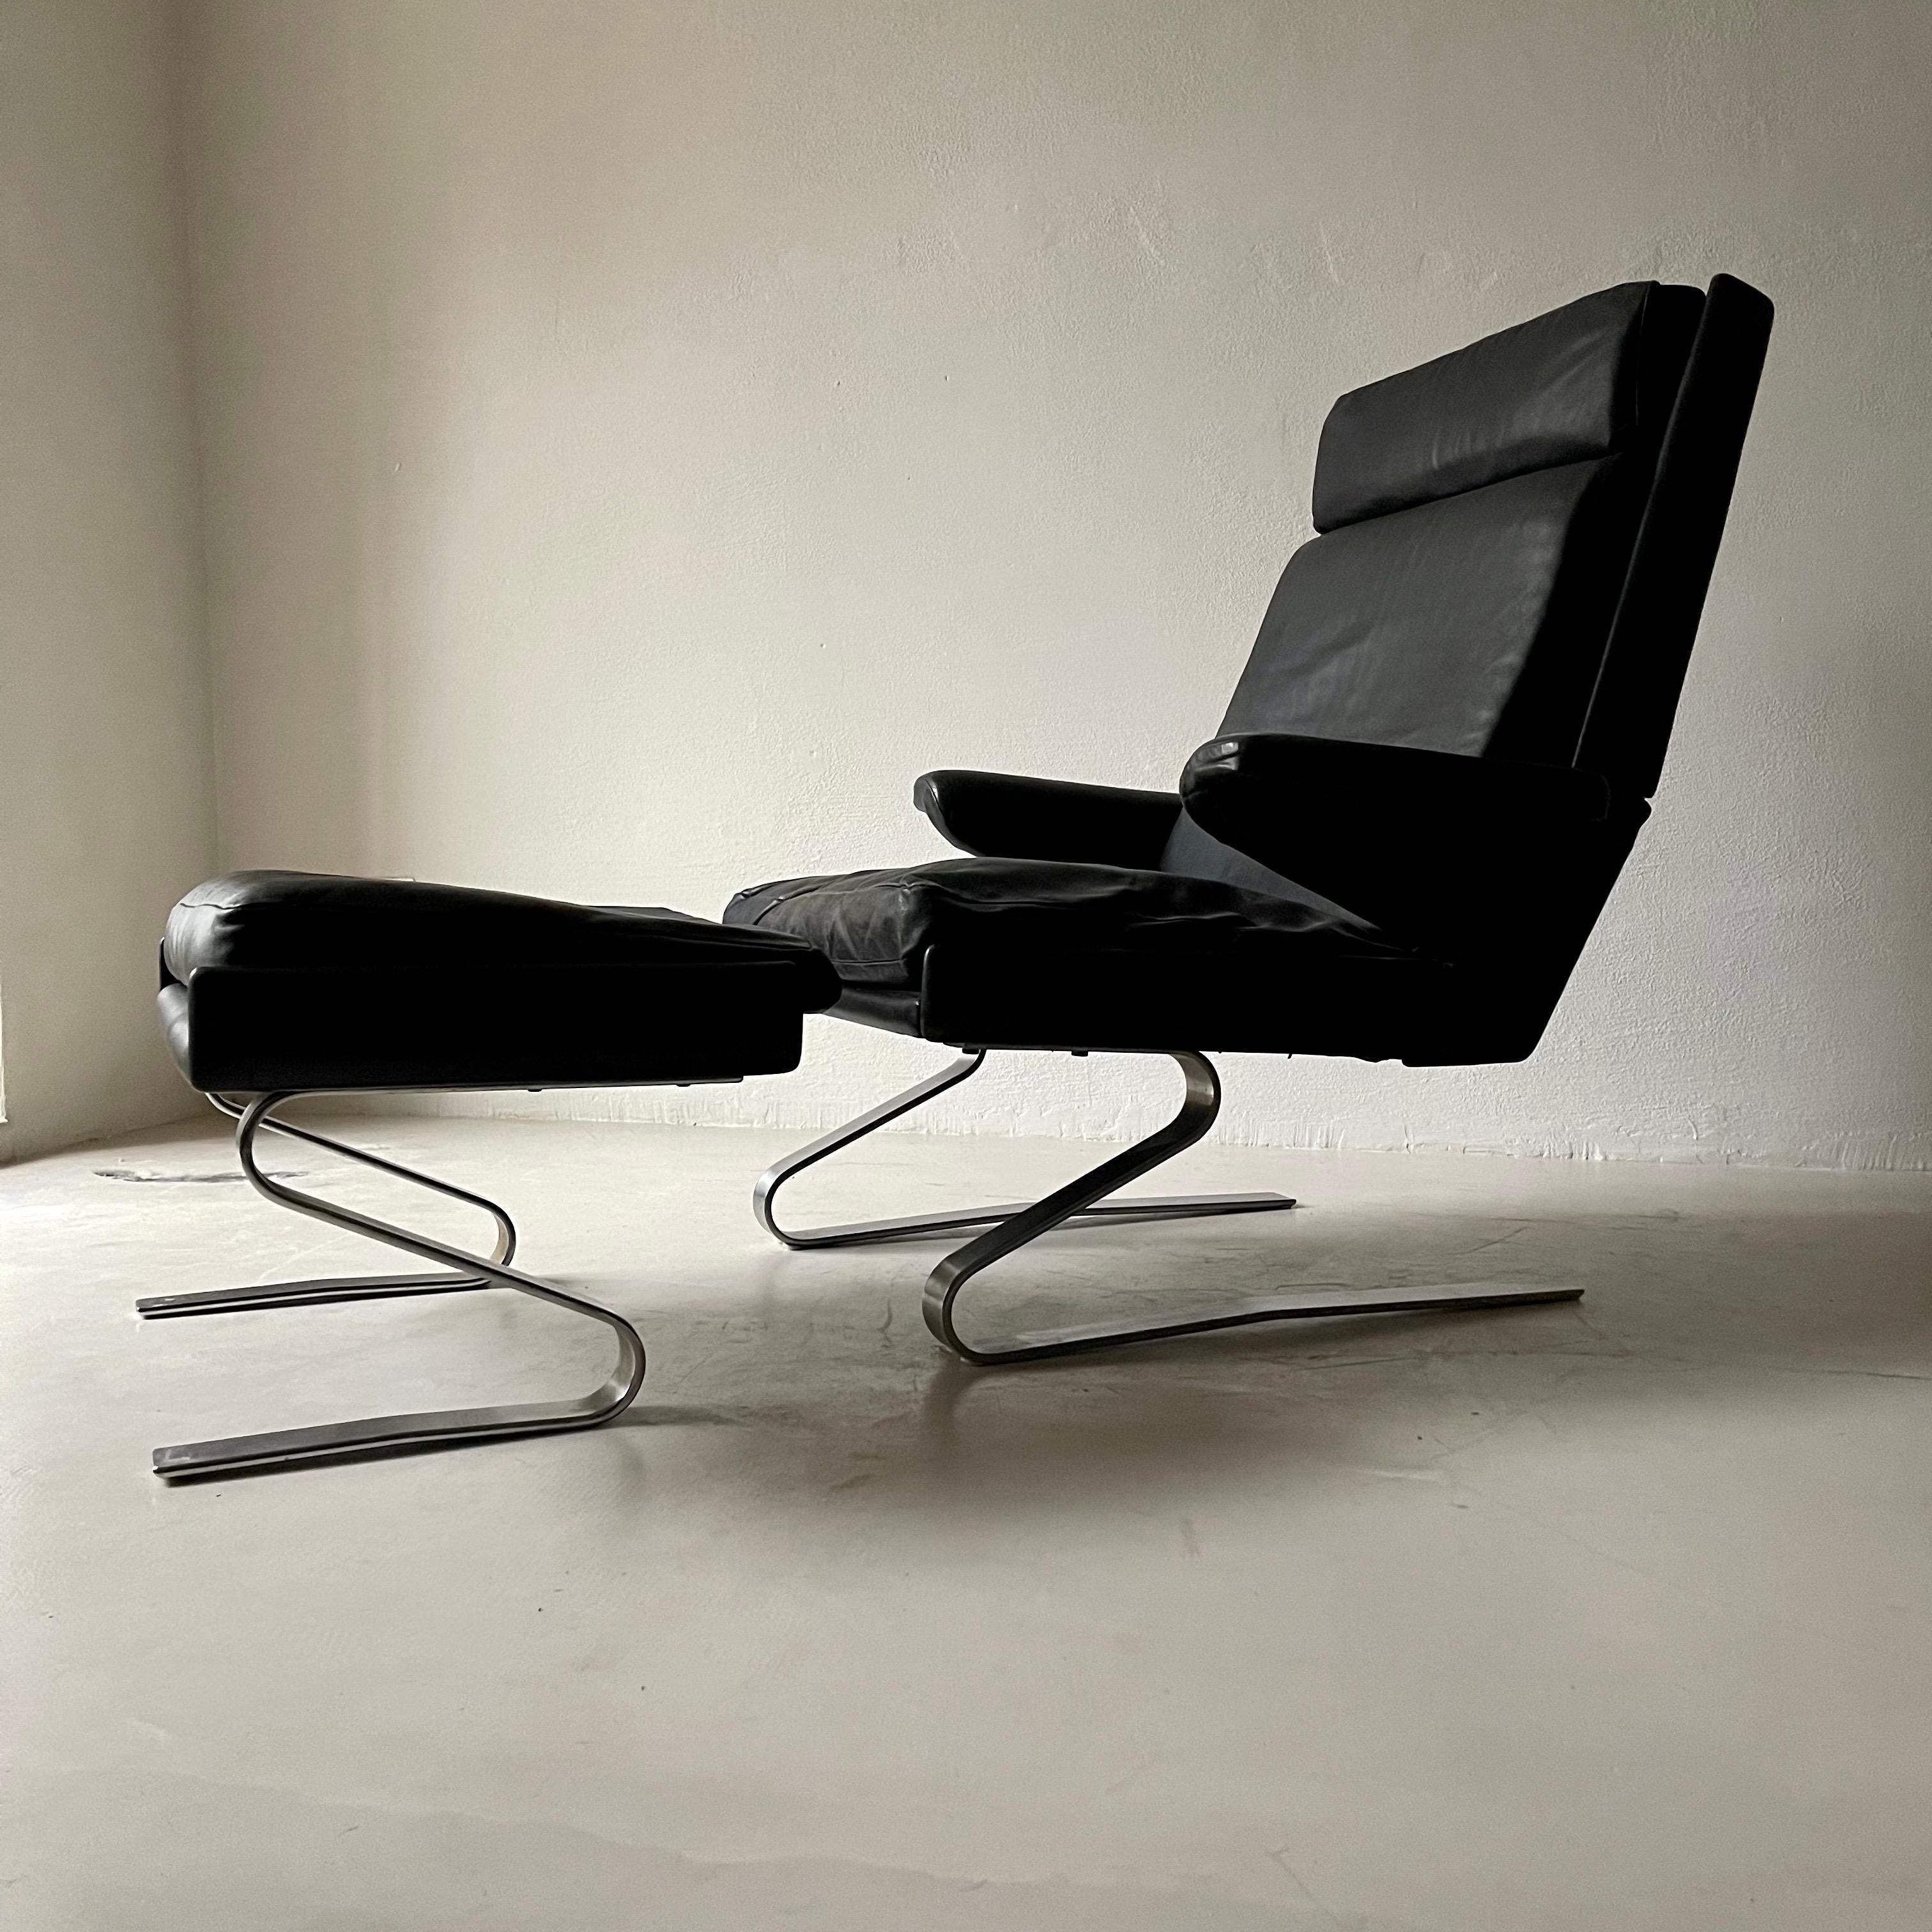 COR swing lounge chair with ottoman. Designed 1972 by Reinhold Adolf and Hans-Jürgen Schröpfer. Upholstered in original patinated black leather. Comfortable and minimalistic.